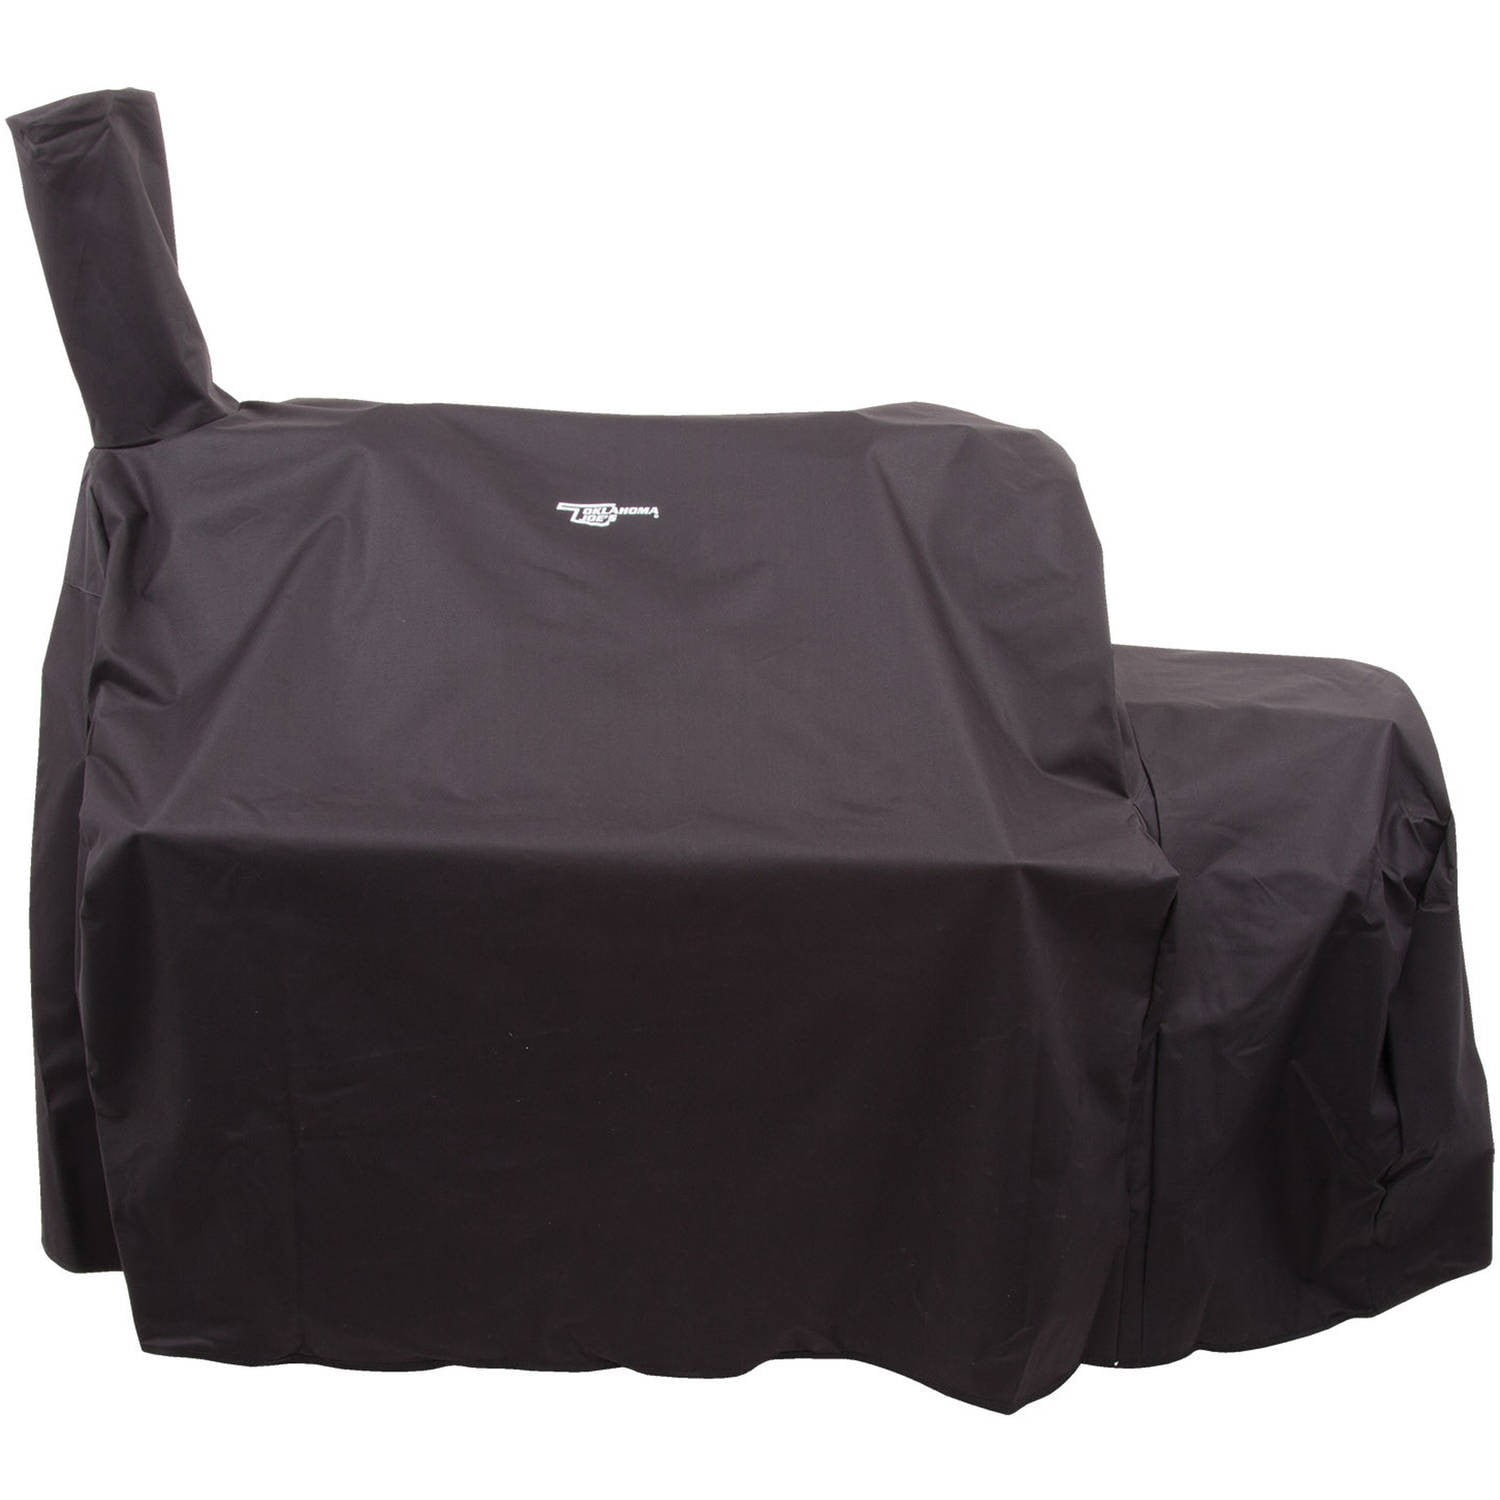 8694010 33.5 X 58.5 X 38 In. Black Grill Cover For Oklahoma Joes Highland Offset Smoker- Pack Of 4